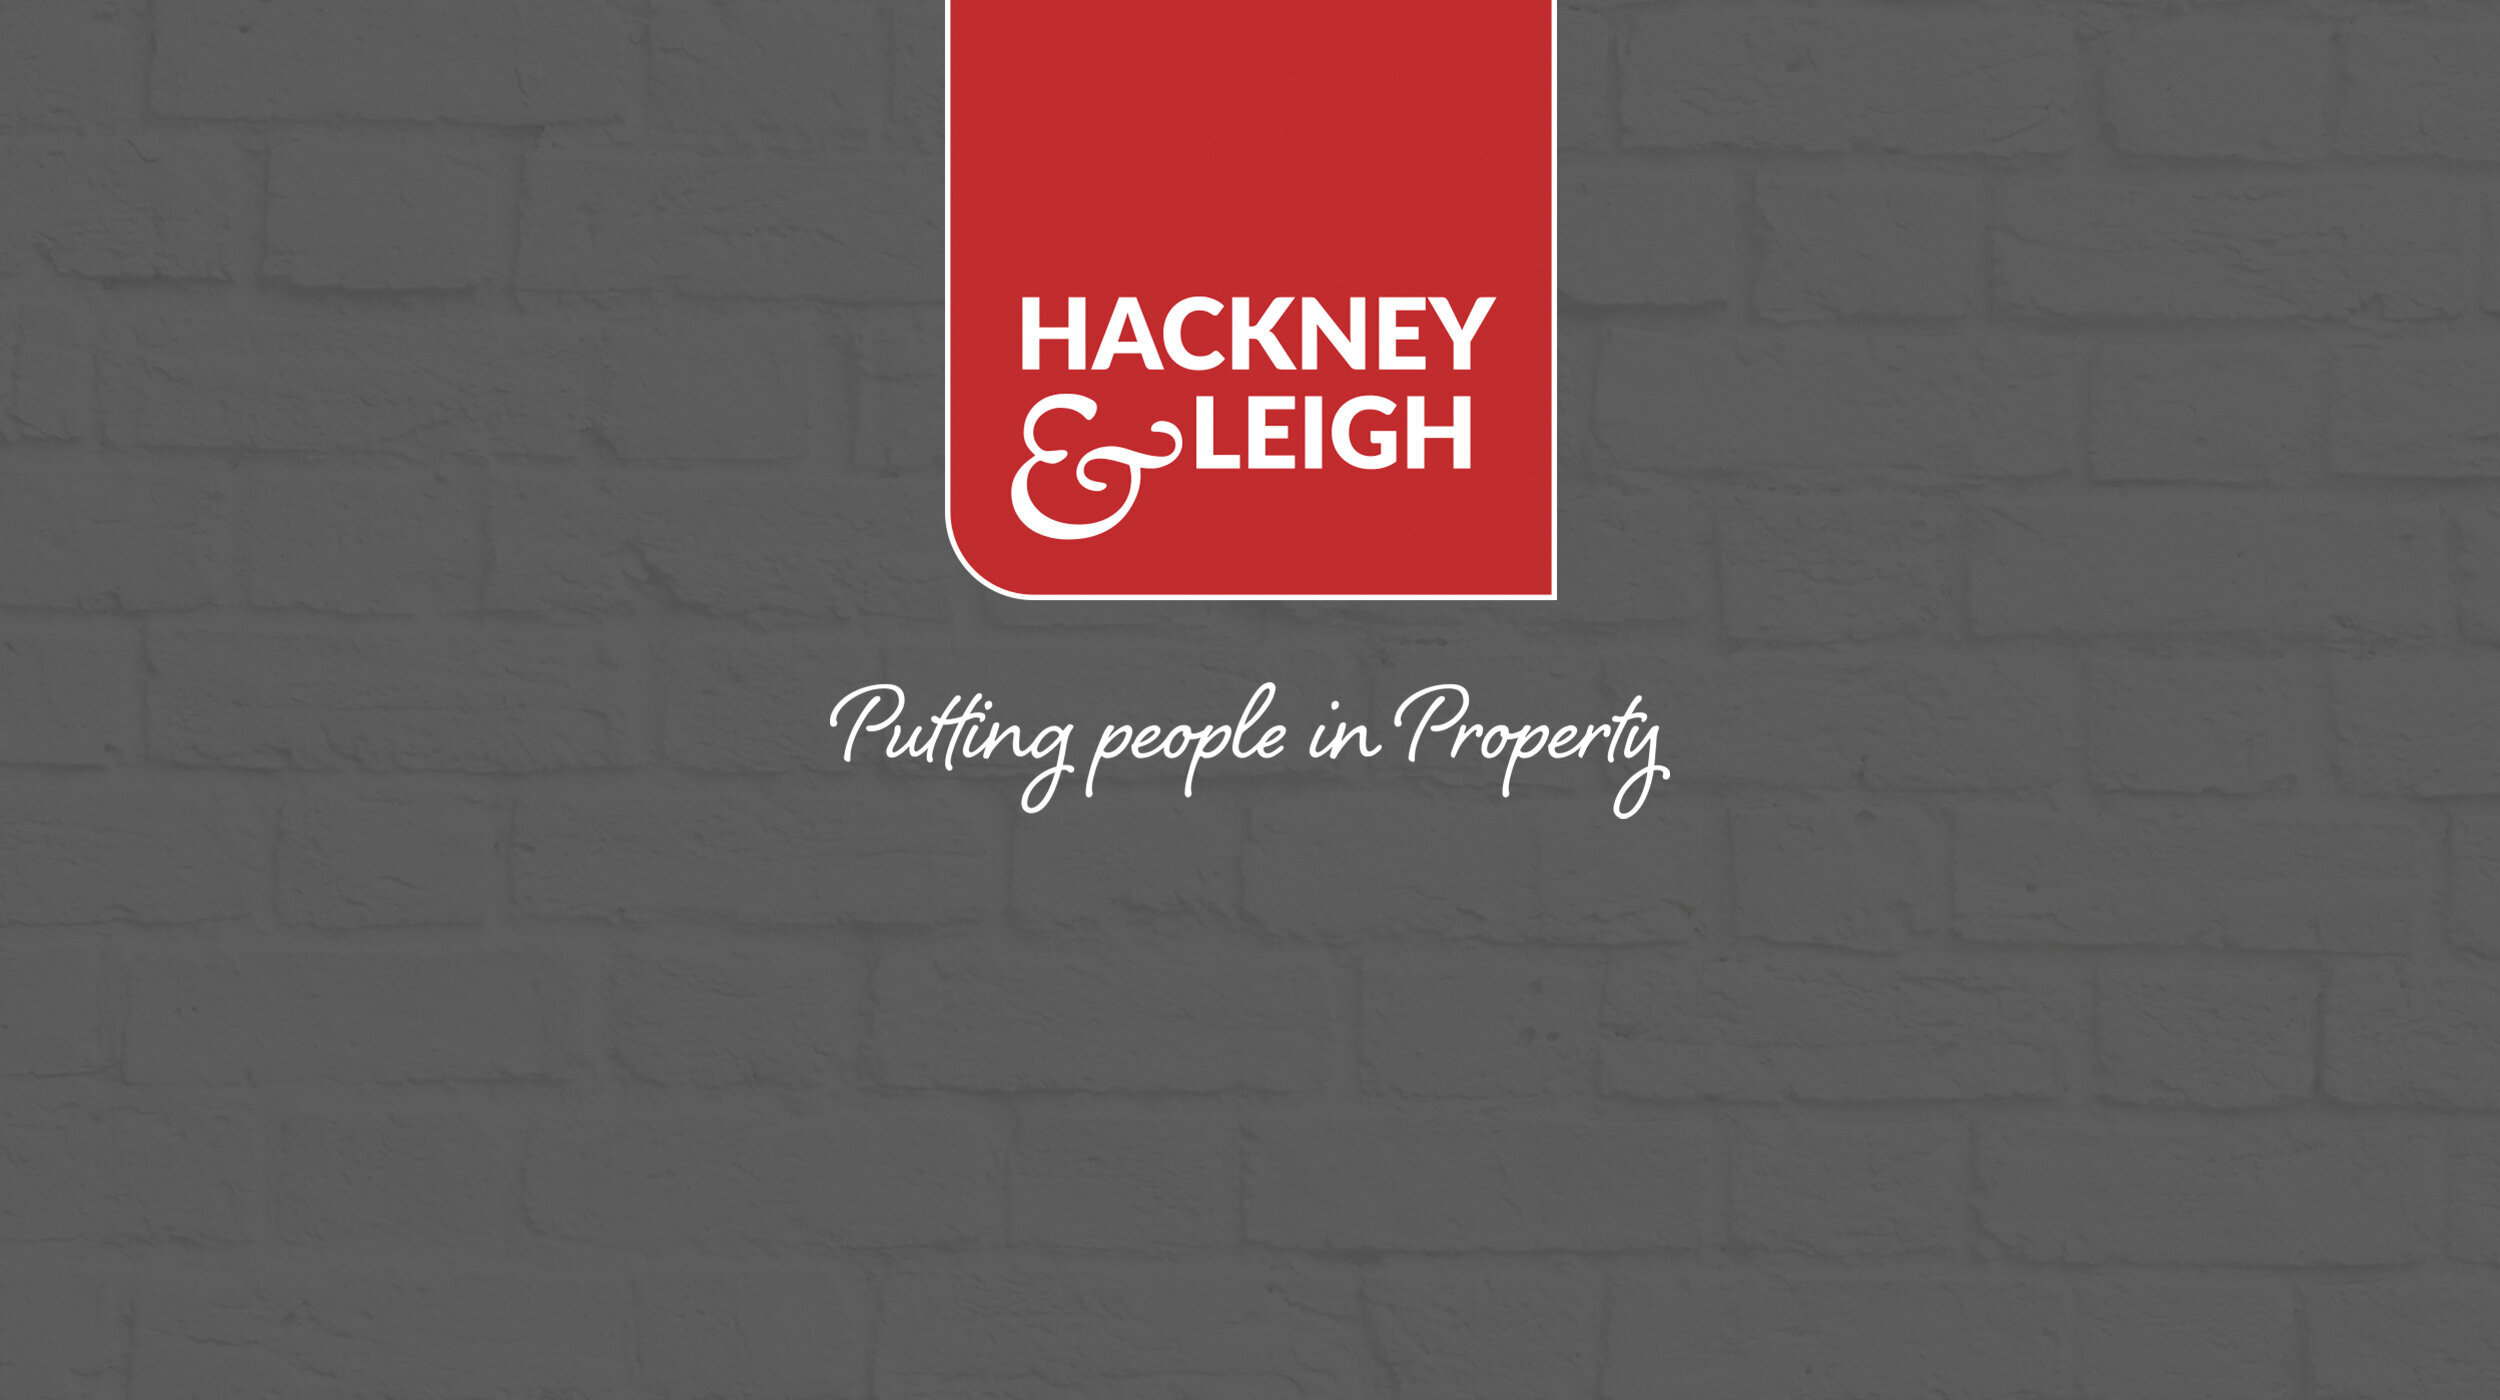 brand-strategy-design-hackney-and-leigh-the-brand-chap-7.jpeg